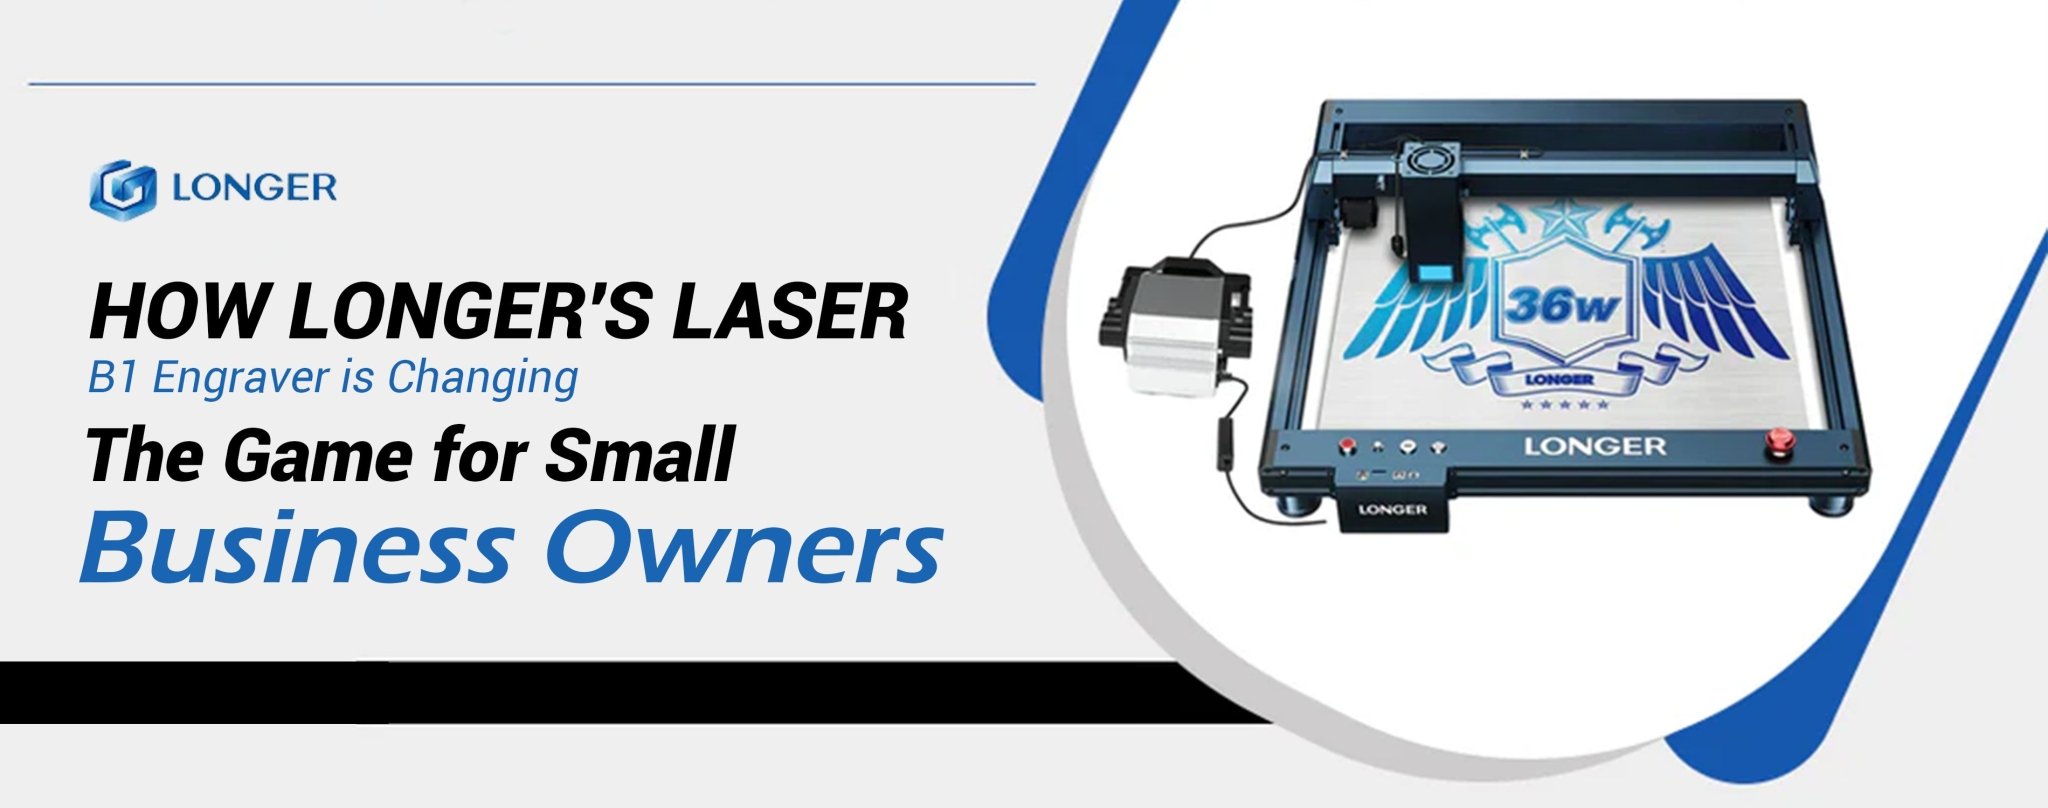 How Longer's Laser B1 Engraver is Changing the Game for Small Business Owners - LONGER